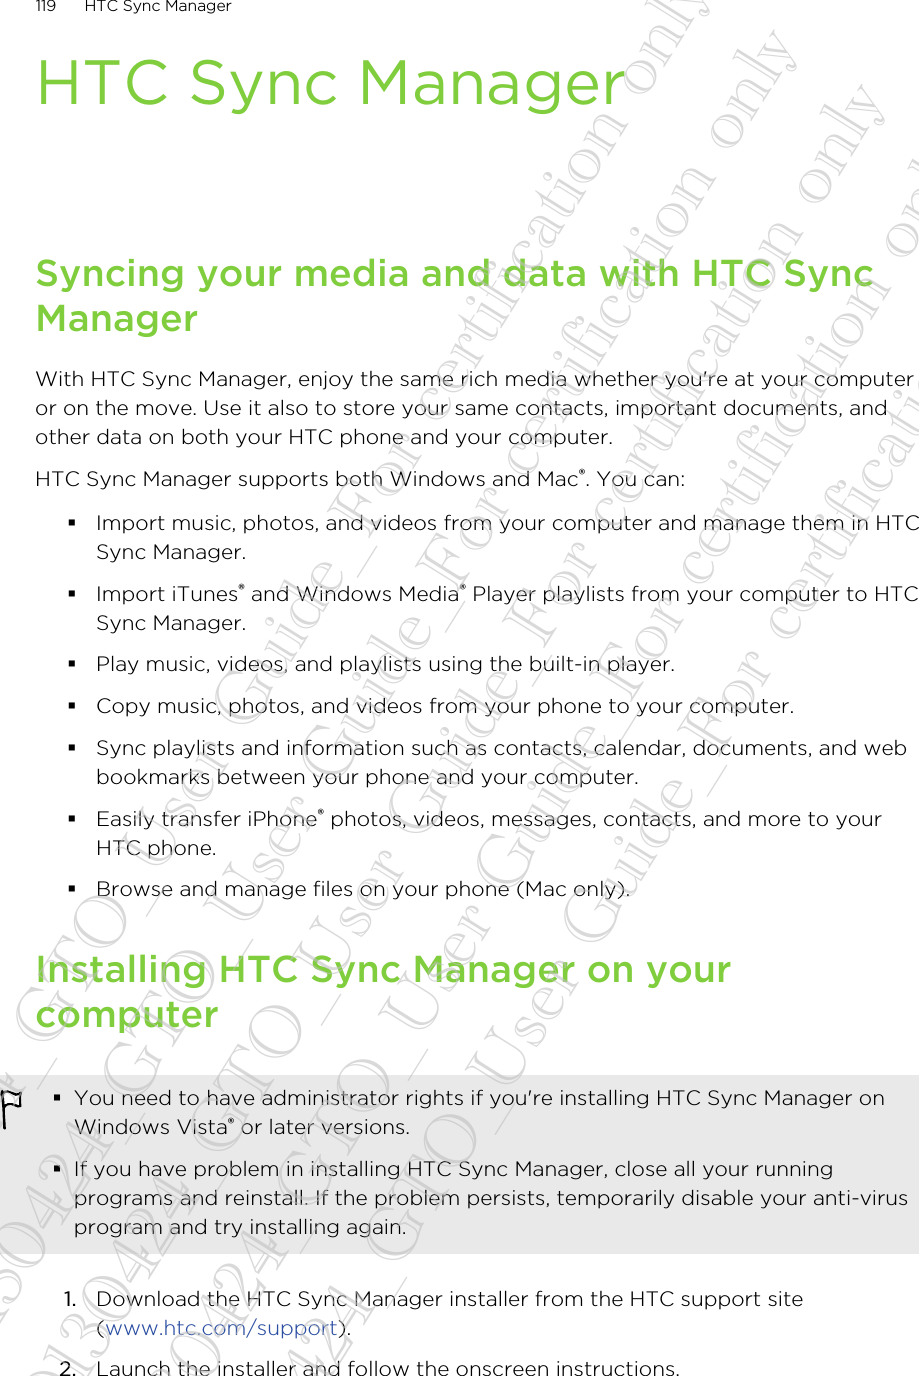 HTC Sync ManagerSyncing your media and data with HTC SyncManagerWith HTC Sync Manager, enjoy the same rich media whether you&apos;re at your computeror on the move. Use it also to store your same contacts, important documents, andother data on both your HTC phone and your computer.HTC Sync Manager supports both Windows and Mac®. You can:§Import music, photos, and videos from your computer and manage them in HTCSync Manager.§Import iTunes® and Windows Media® Player playlists from your computer to HTCSync Manager.§Play music, videos, and playlists using the built-in player.§Copy music, photos, and videos from your phone to your computer.§Sync playlists and information such as contacts, calendar, documents, and webbookmarks between your phone and your computer.§Easily transfer iPhone® photos, videos, messages, contacts, and more to yourHTC phone.§Browse and manage files on your phone (Mac only).Installing HTC Sync Manager on yourcomputer§You need to have administrator rights if you&apos;re installing HTC Sync Manager onWindows Vista® or later versions.§If you have problem in installing HTC Sync Manager, close all your runningprograms and reinstall. If the problem persists, temporarily disable your anti-virusprogram and try installing again.1. Download the HTC Sync Manager installer from the HTC support site(www.htc.com/support).2. Launch the installer and follow the onscreen instructions.119 HTC Sync Manager20130424_GTO_User Guide_For certification only 20130424_GTO_User Guide_For certification only 20130424_GTO_User Guide_For certification only 20130424_GTO_User Guide_For certification only 20130424_GTO_User Guide_For certification only